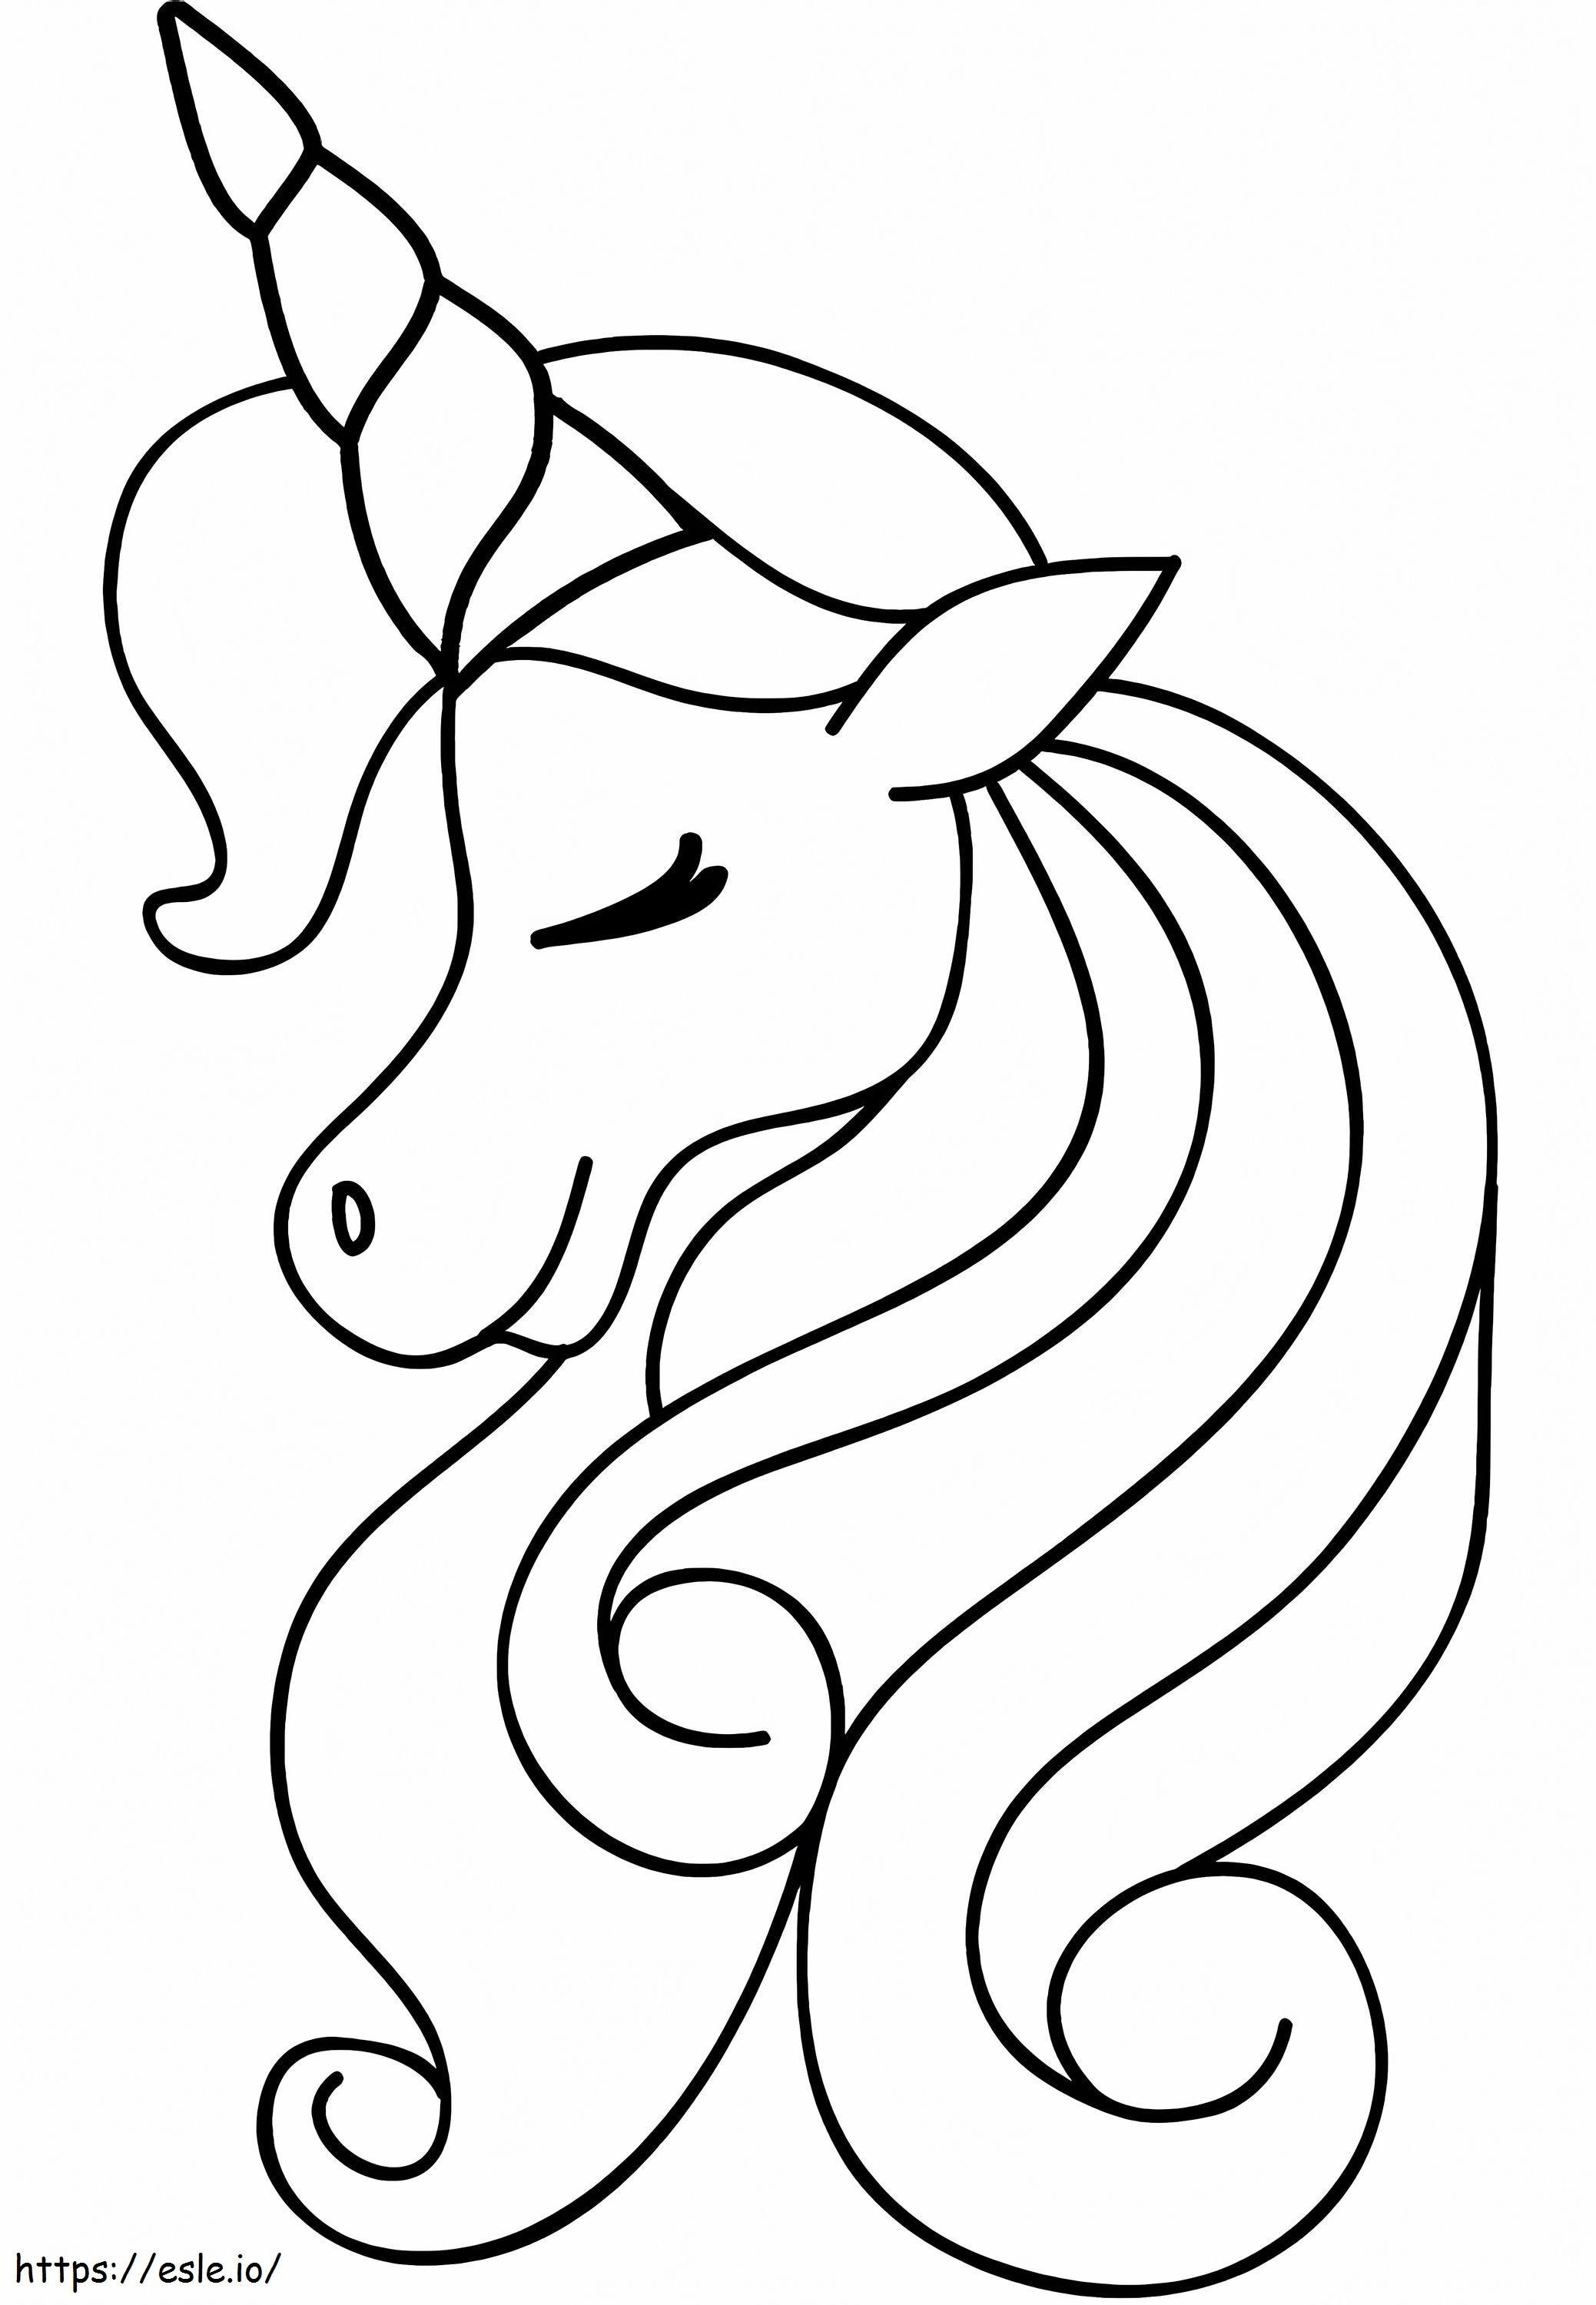 1564622289 Girl Unicorn Head A4 coloring page